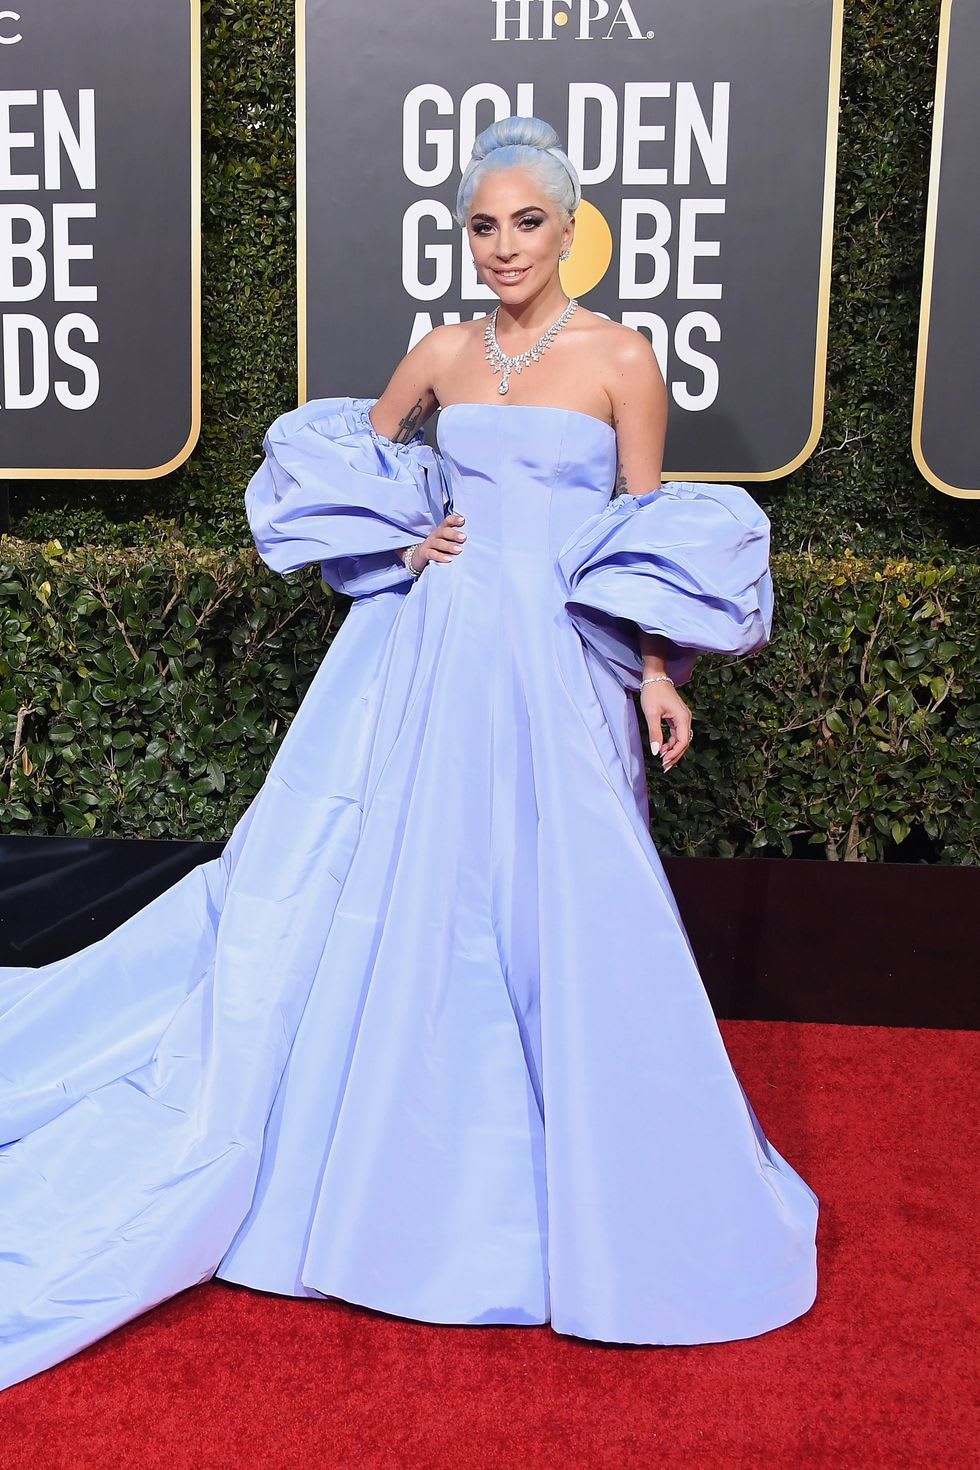 The Best Dressed Celebrities at the 2019 Golden Globes: Lady Gaga